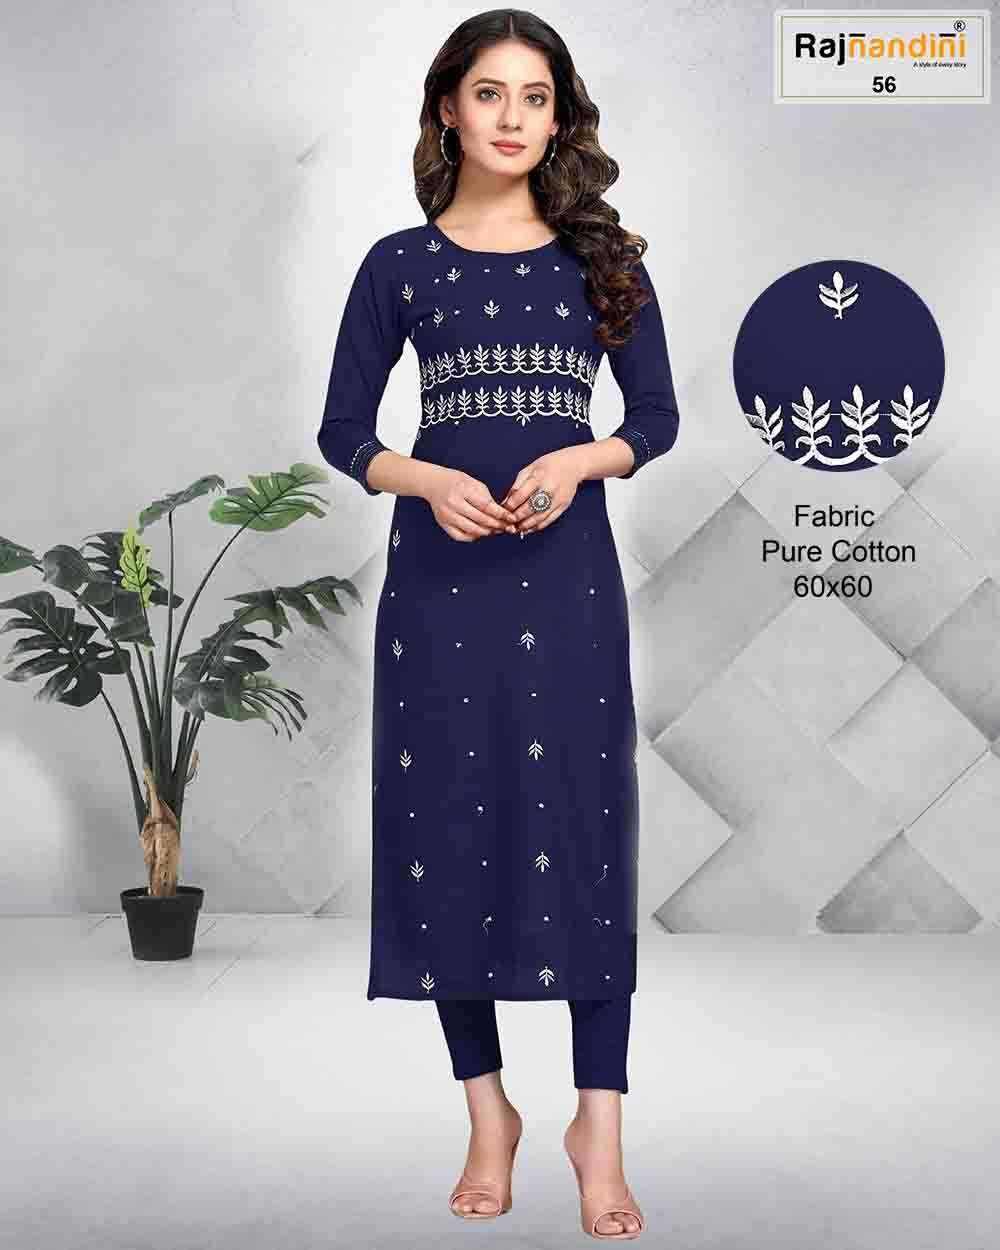 PRINT VOL-18 BY RAJNANDINI DESIGNER STYLISH FANCY COLORFUL BEAUTIFUL PARTY WEAR & ETHNIC WEAR COLLECTION PURE COTTON PRINT KURTIS AT WHOLESALE PRICE